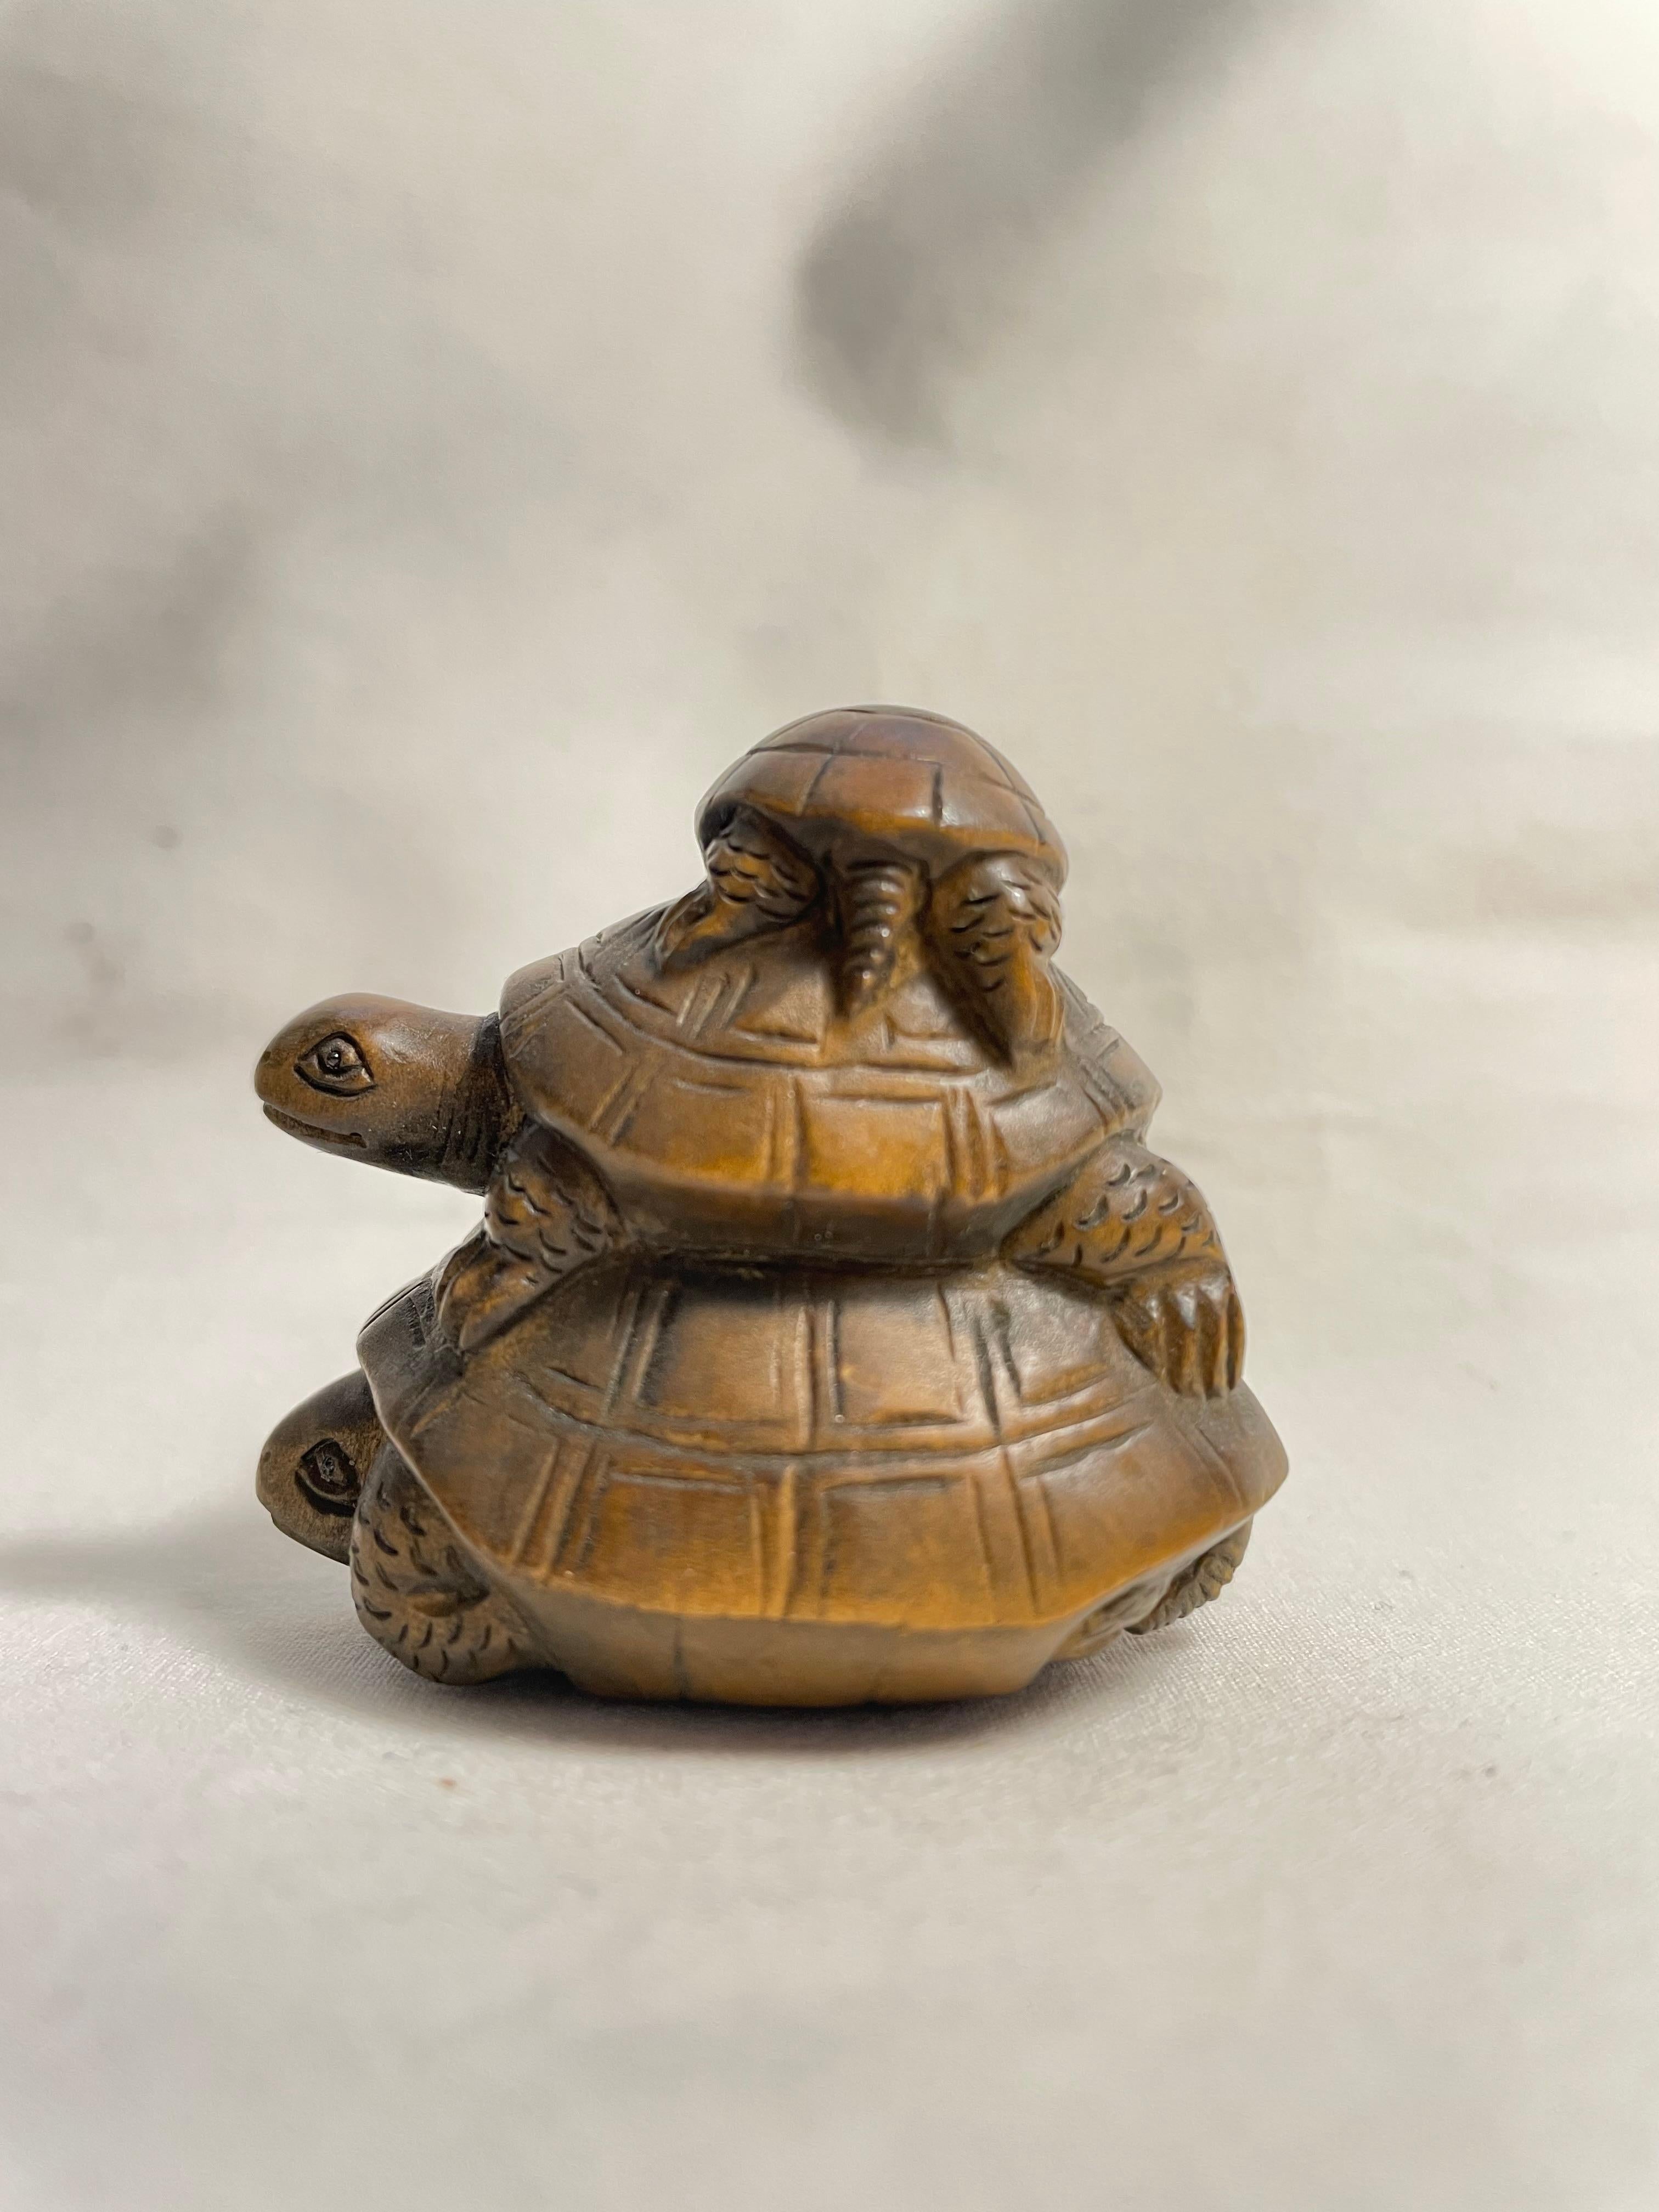 This is an antique netsuke made in Japan around meiji period 1900s.

Netsuke is a miniature sculpture, originating in 17th century Japan.
Initially a simply-carved button fastener on the cords of an inro box, netsuke later developed into ornately